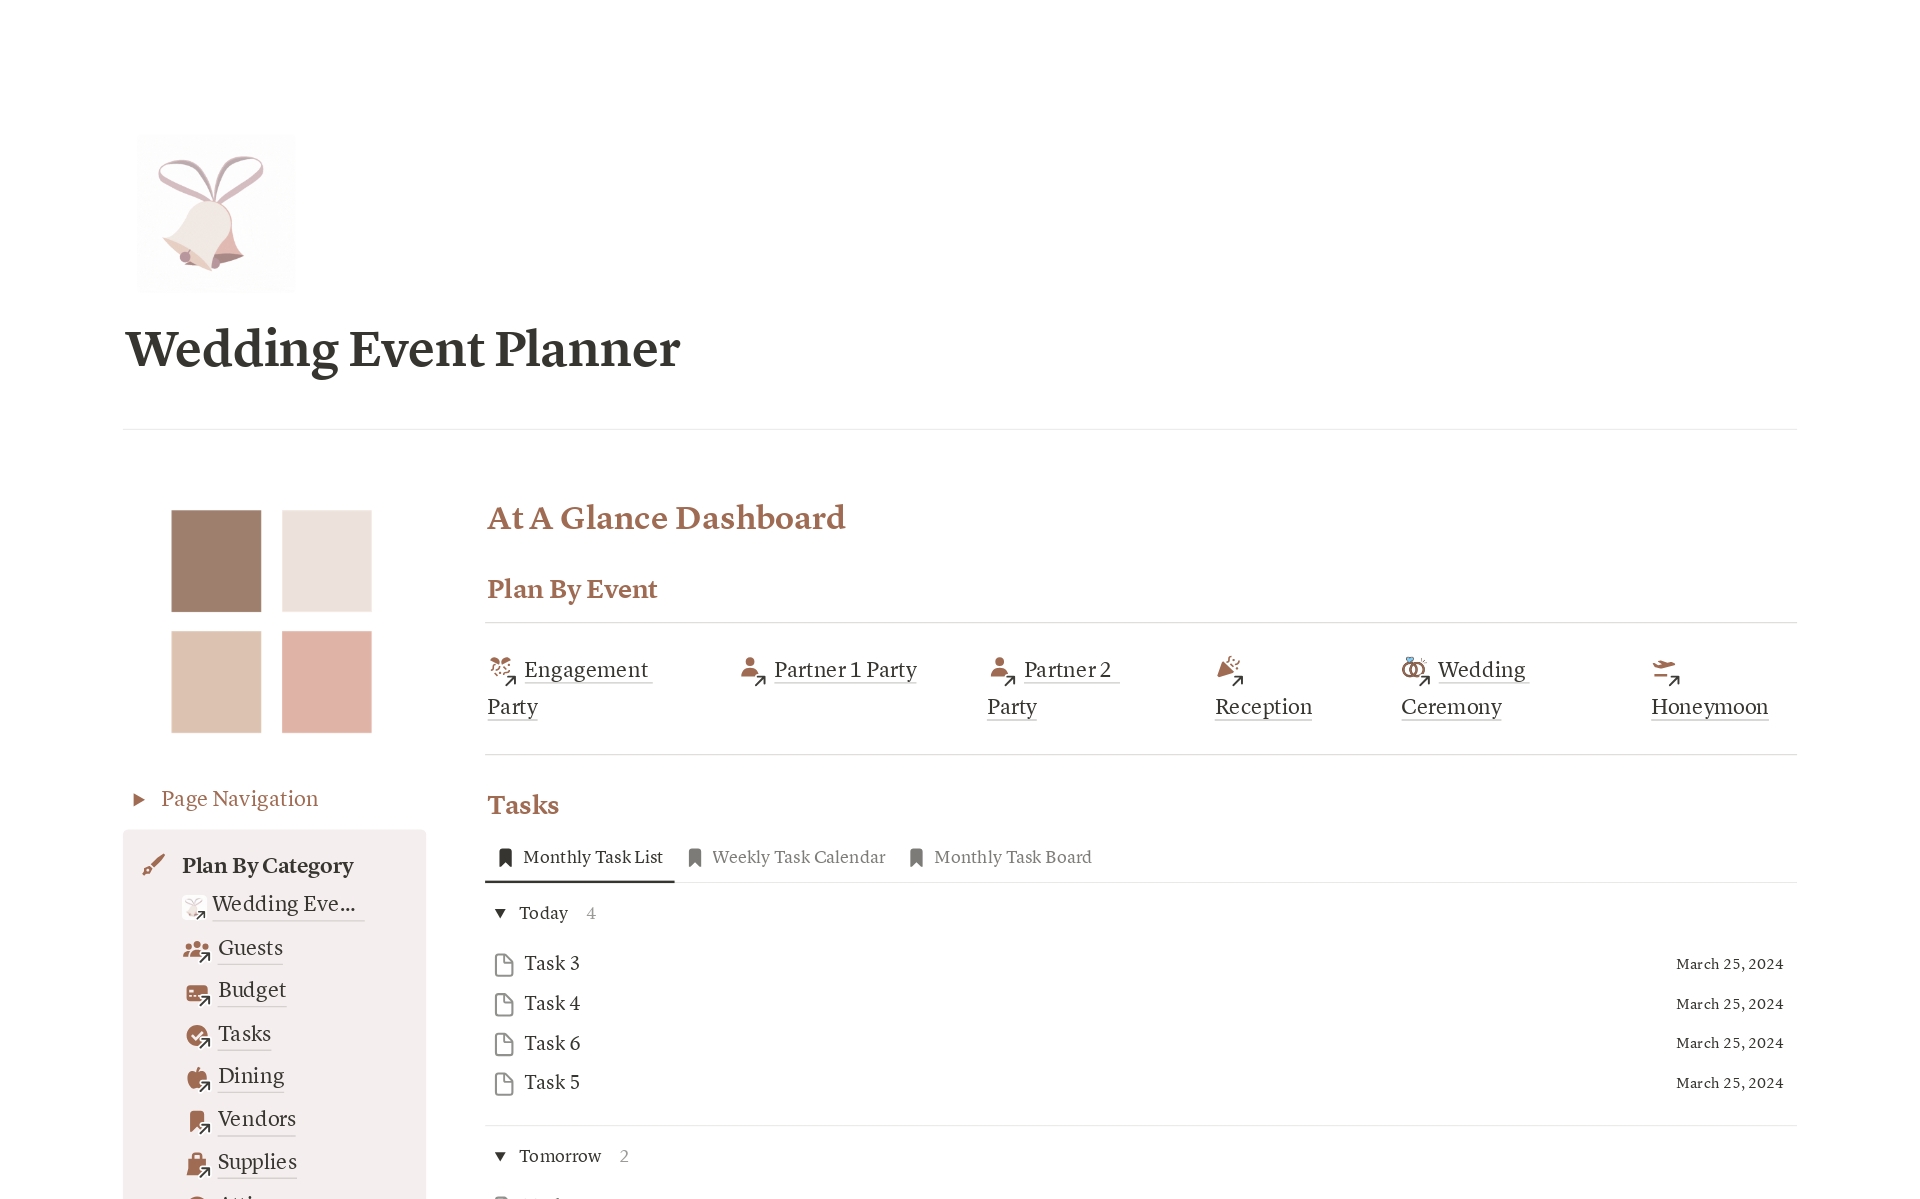 Planning a wedding can feel overwhelming. This planner lets you bring your vision to life while your planner does the admin work for you. Includes dedicated sections to plan Mood Boards, Seating Arrangements, Timelines, Guest Lists, Activities, Budgets, Supplies, and more.
